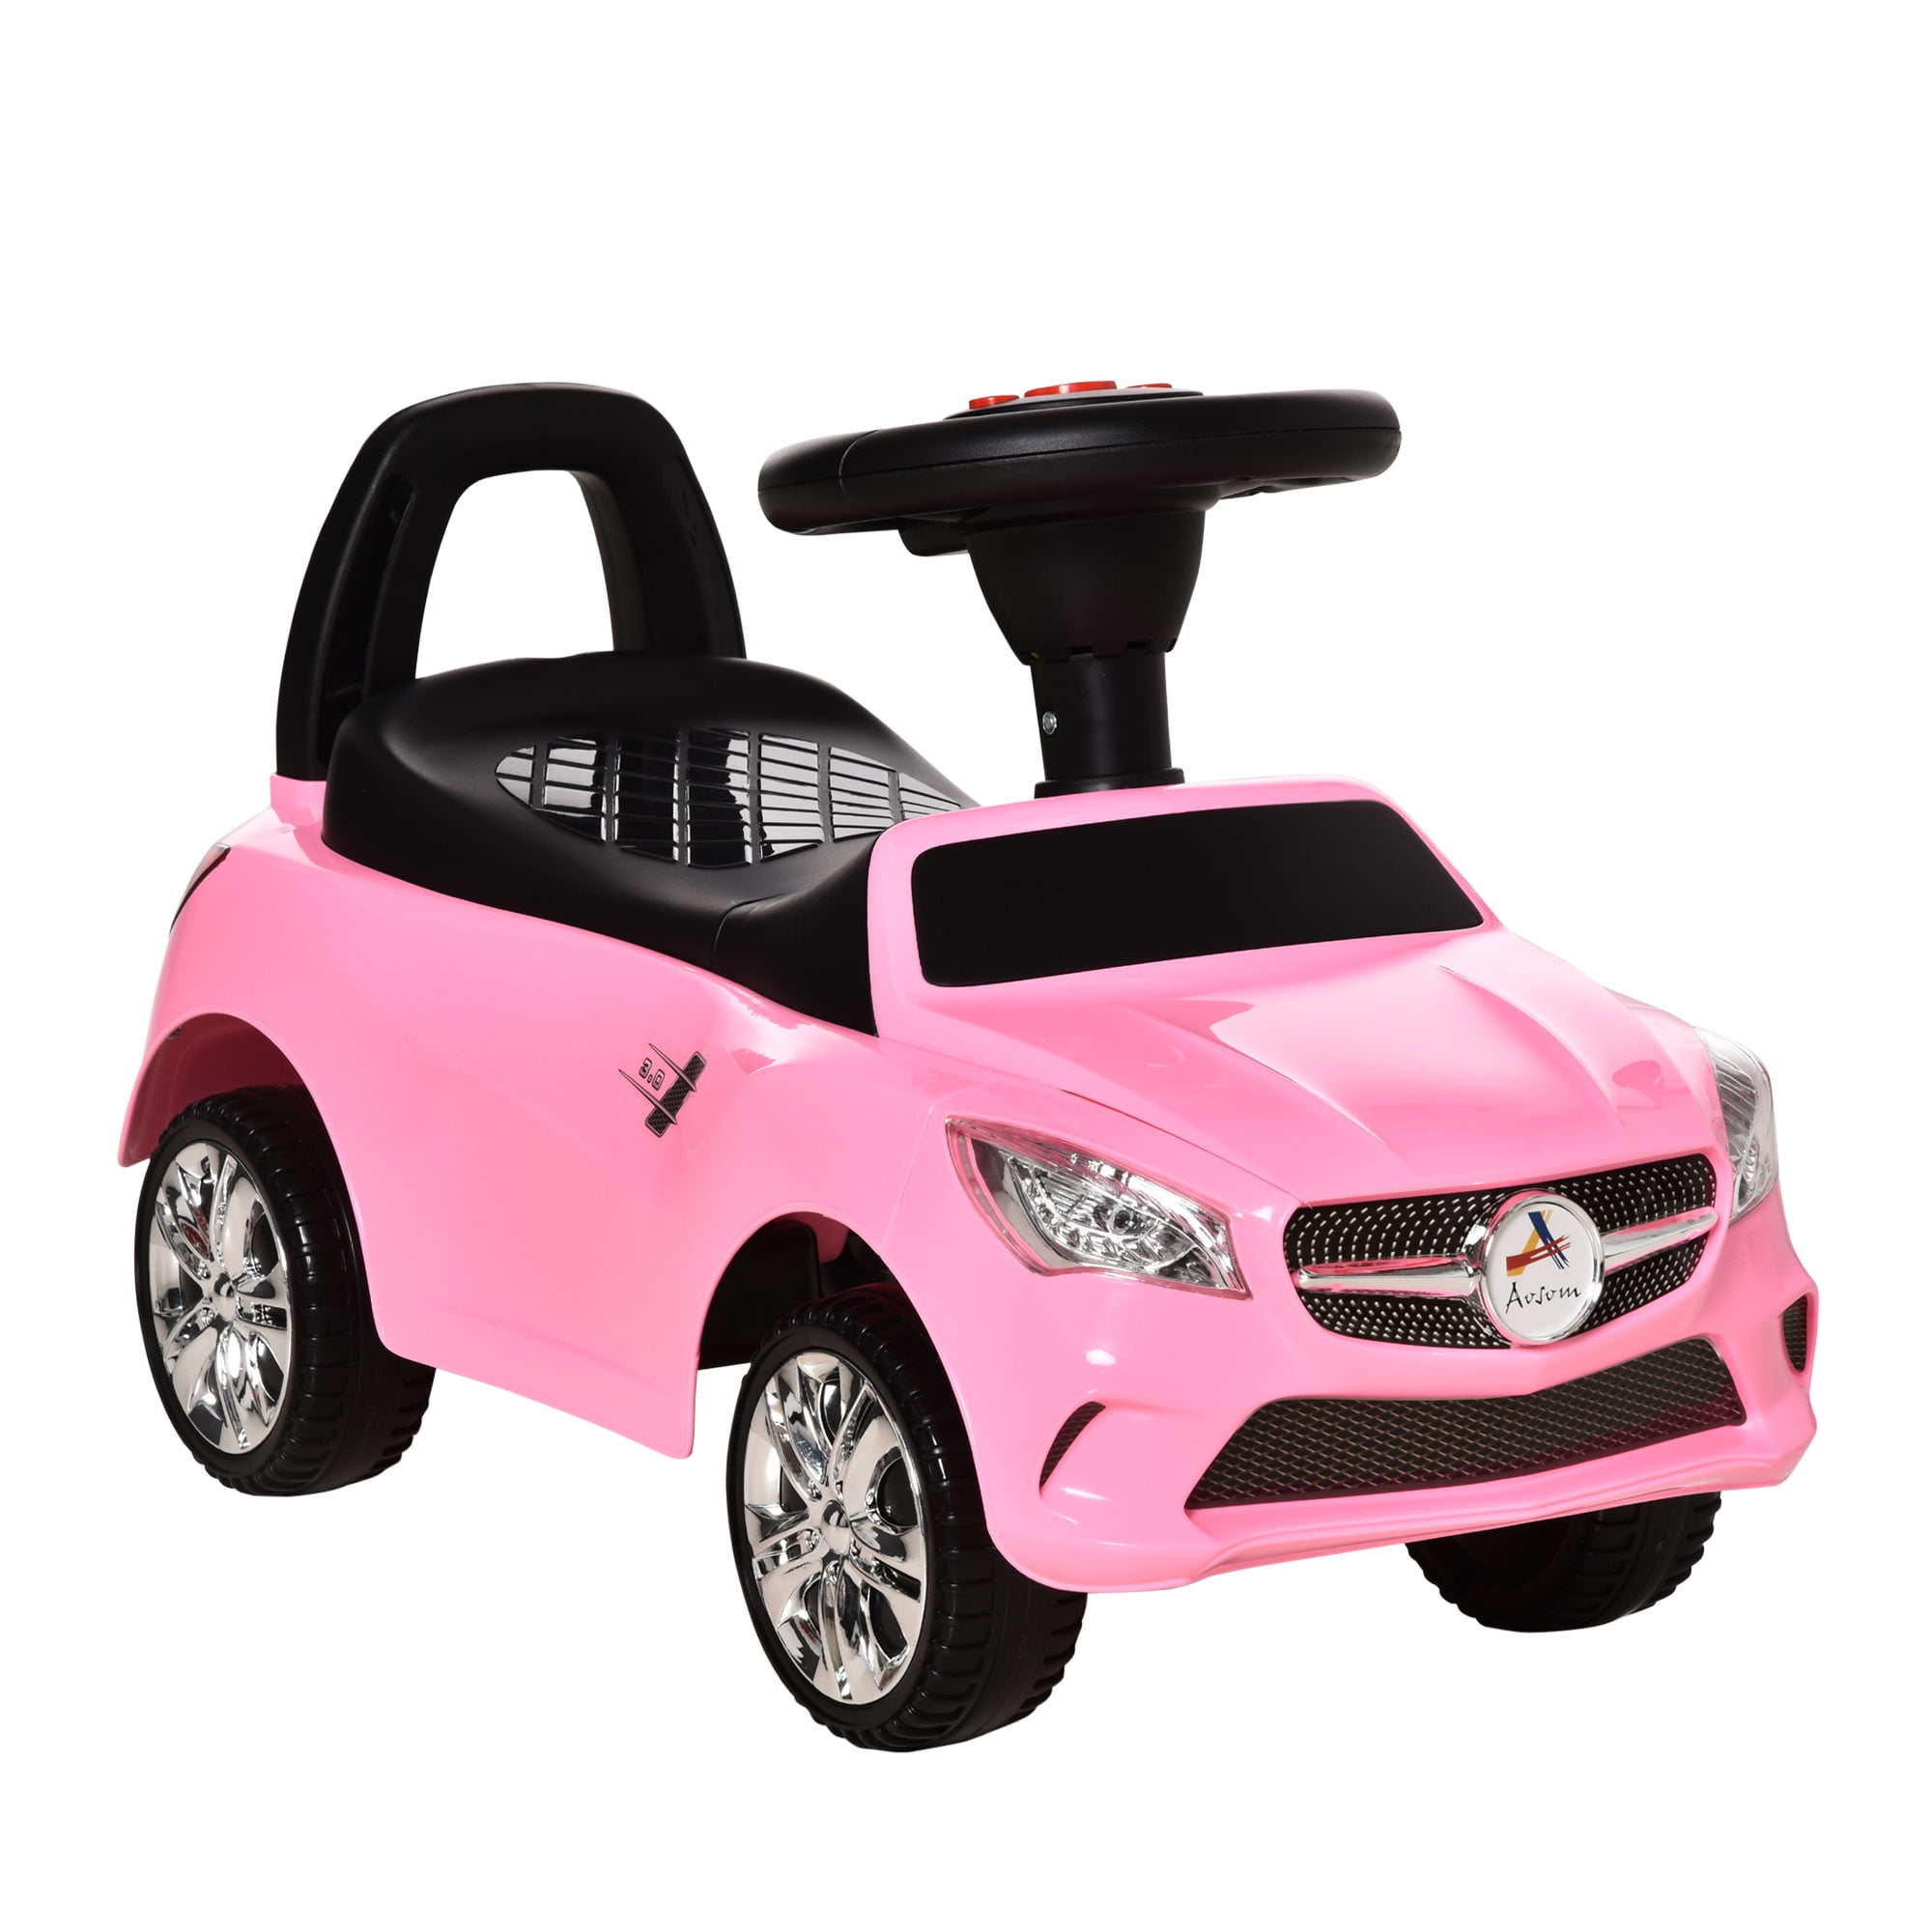 Toys 80-1277HP for Toddlers Gears or Pedals Uses Twist Ride On Car No Batteries Turn 2 Years Old and Up Trademark Global Wiggle Movement to Steer Zigzag Car-Pink Kids